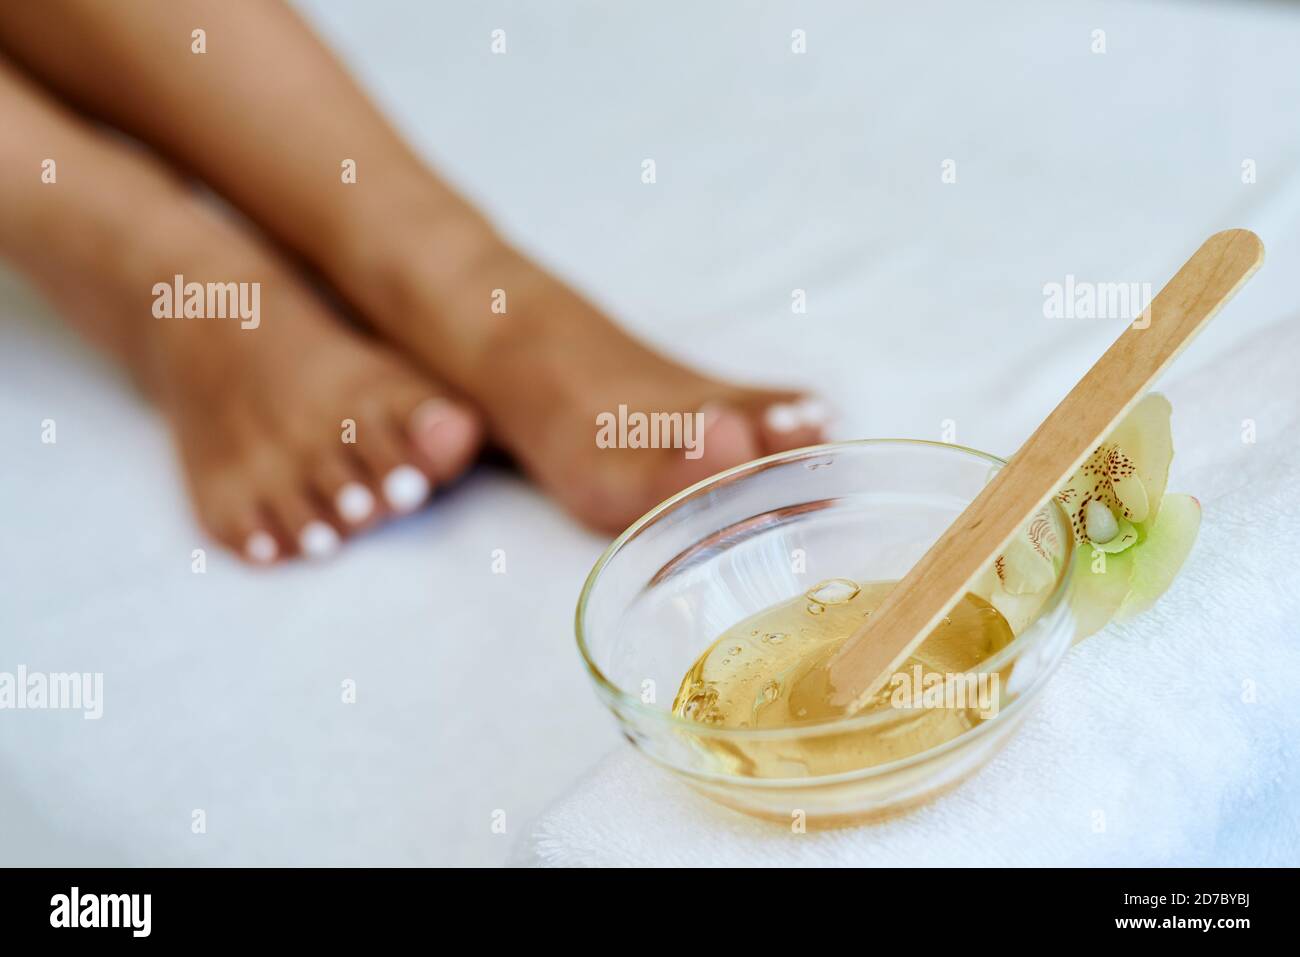 Cosmetologist is doing depilation. The procedures at the beautician. A jar of wax in the foreground. Stock Photo